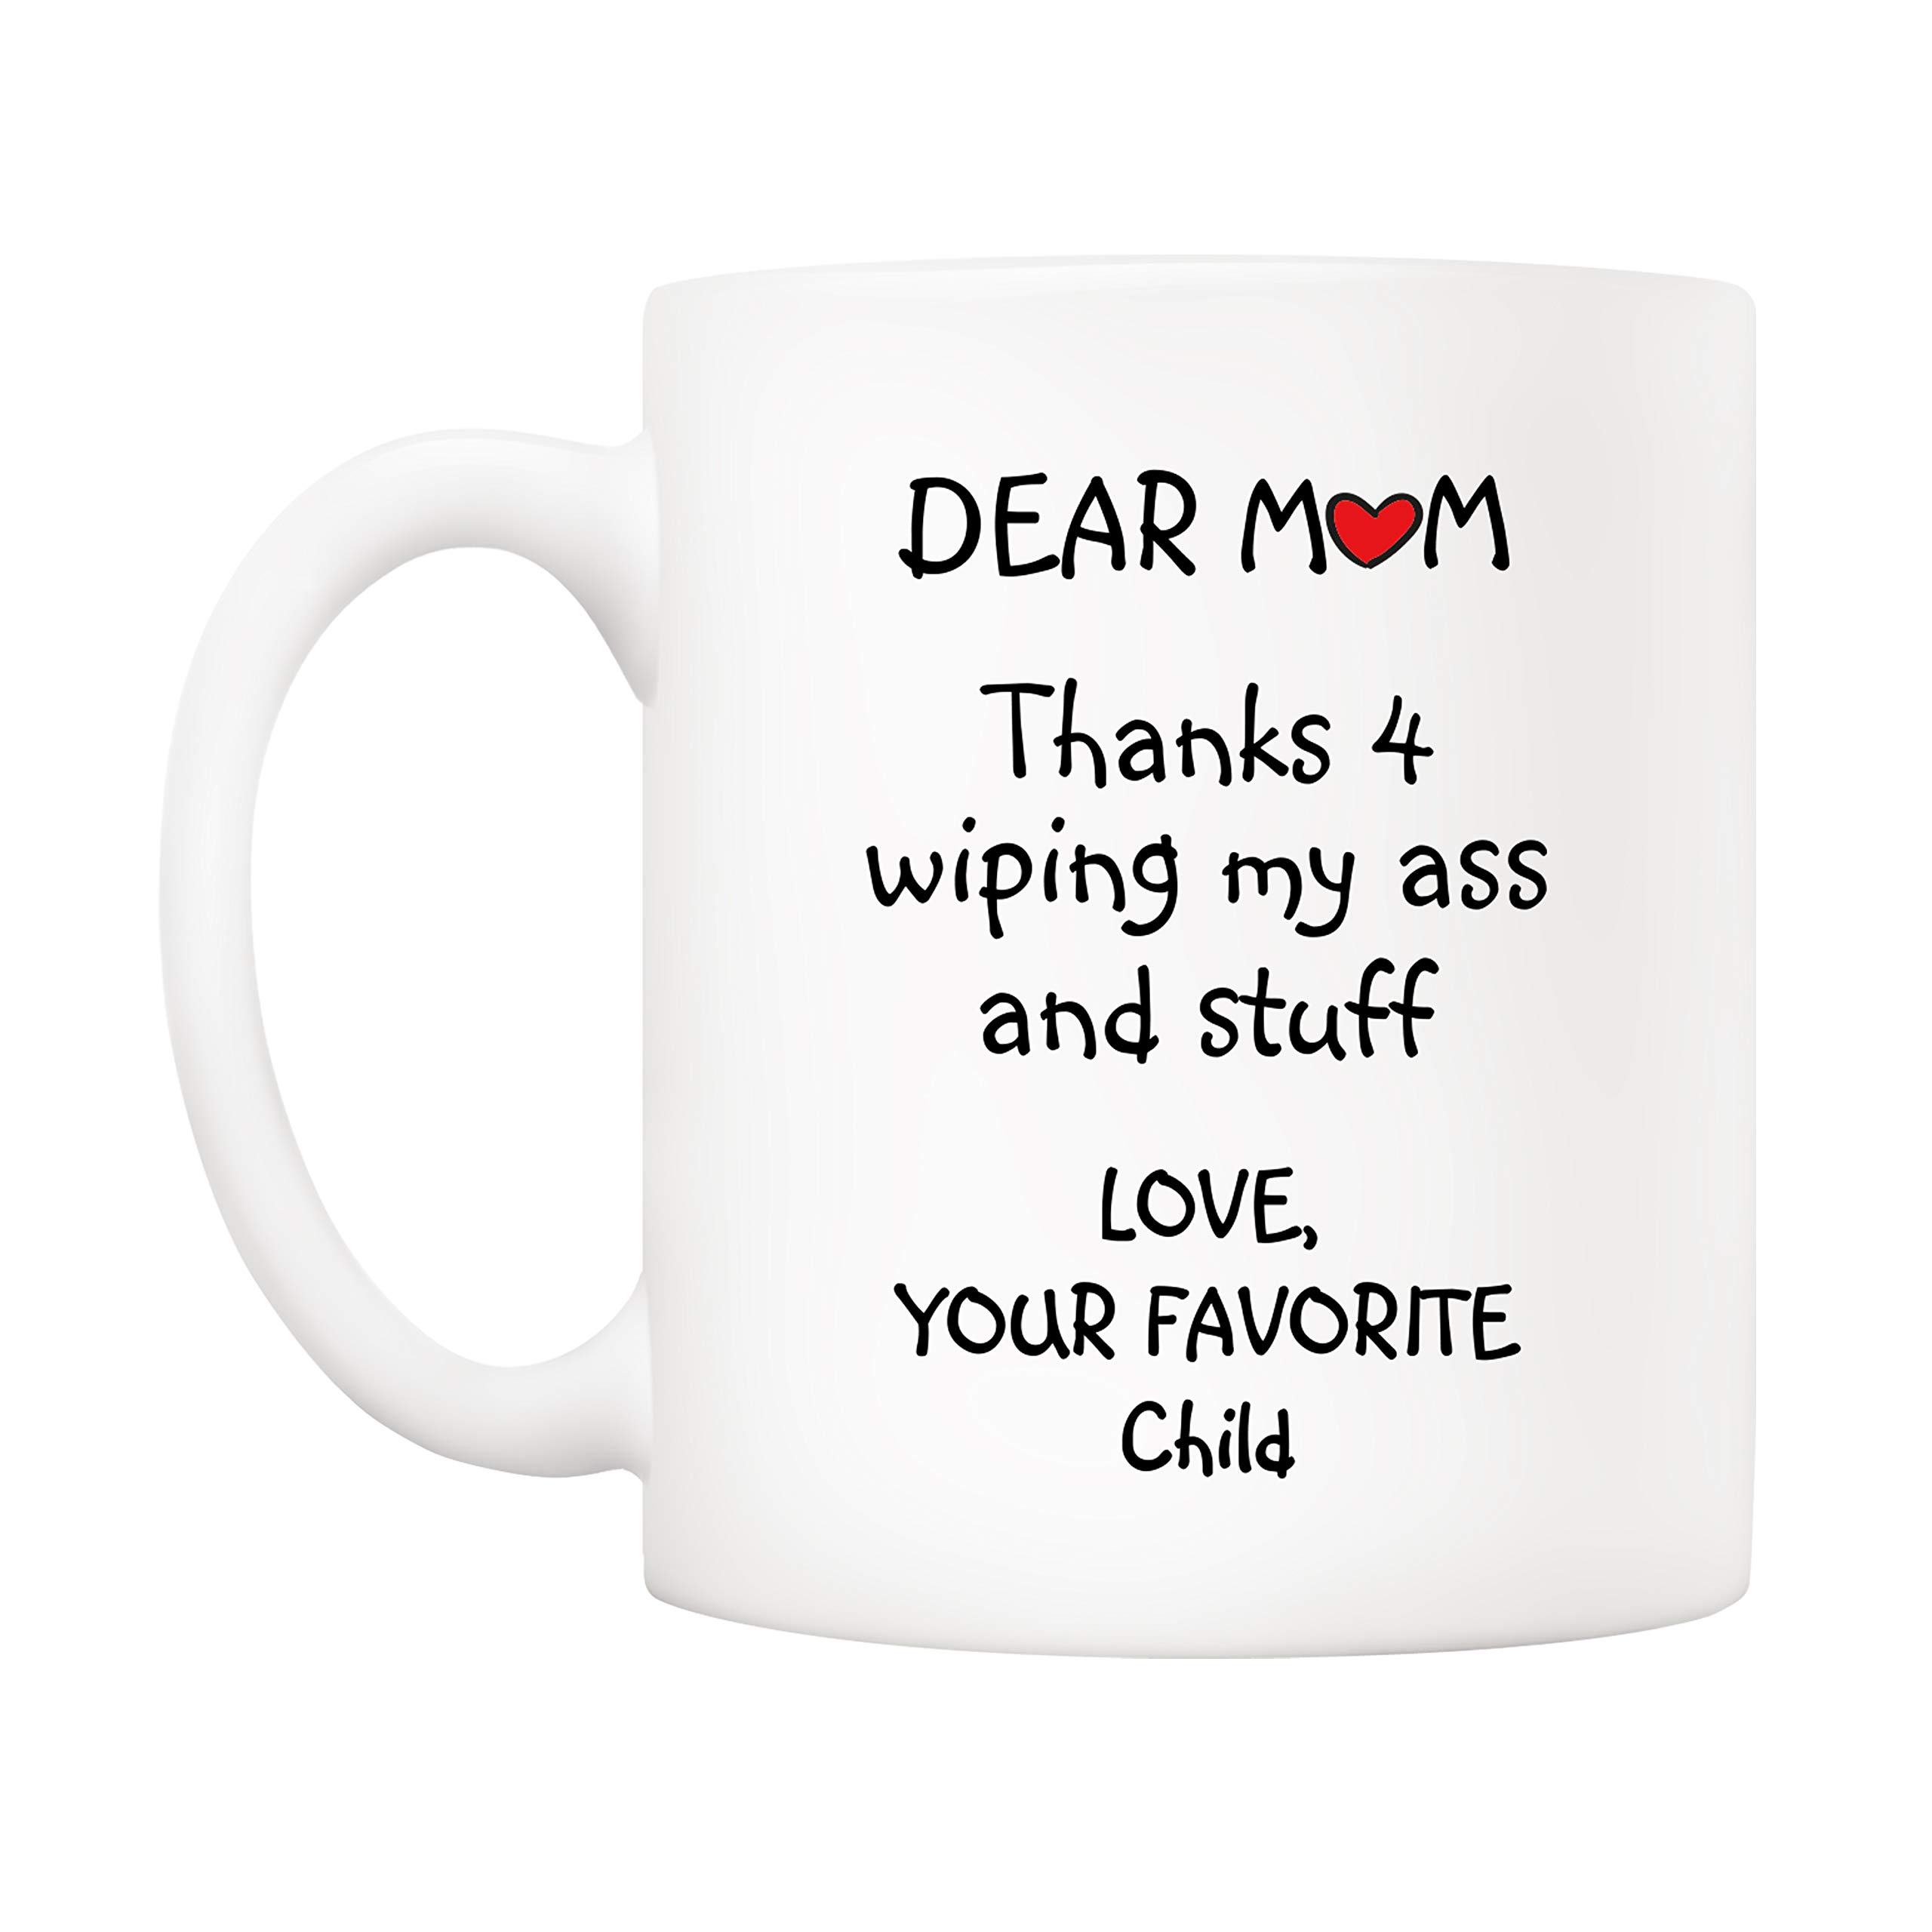 5Aup Funny Mother's Day Mom Gifts, Dear Mom Thanks 4 Wiping My... Your Favorite Child Coffee Mug, Funny Mother Cup from Daughter Son 11 Oz